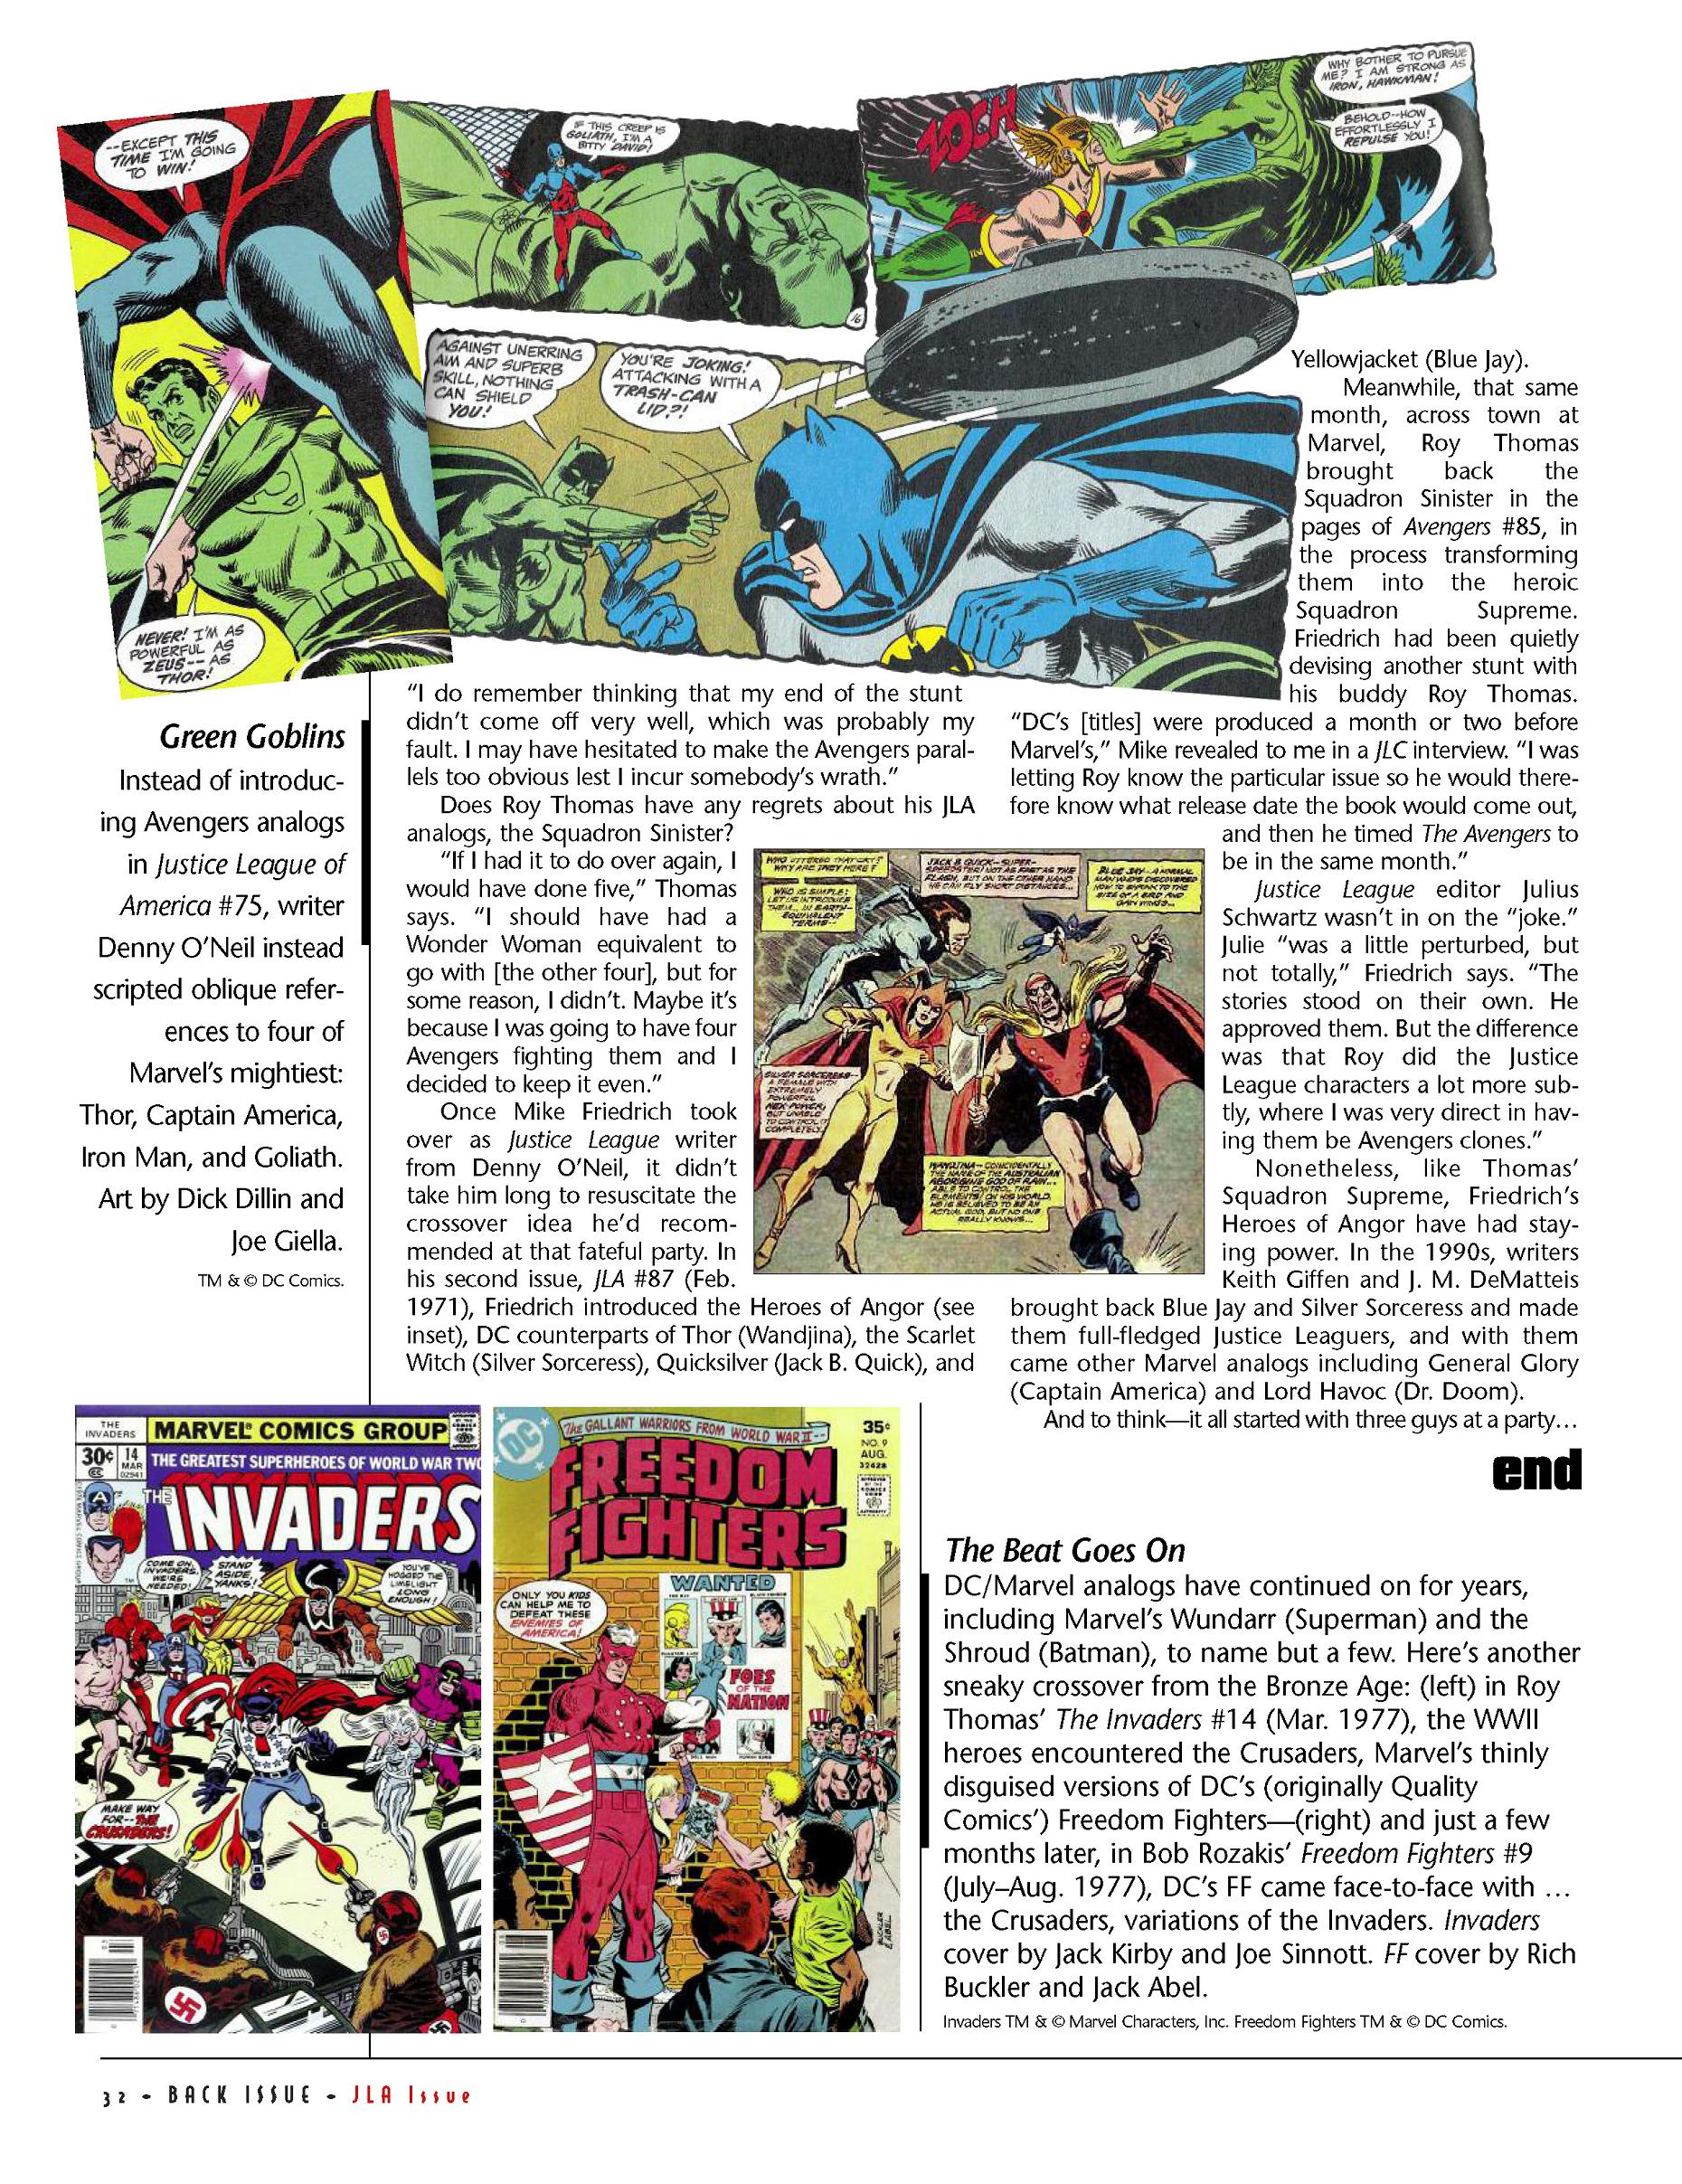 Read online Back Issue comic -  Issue #58 - 33